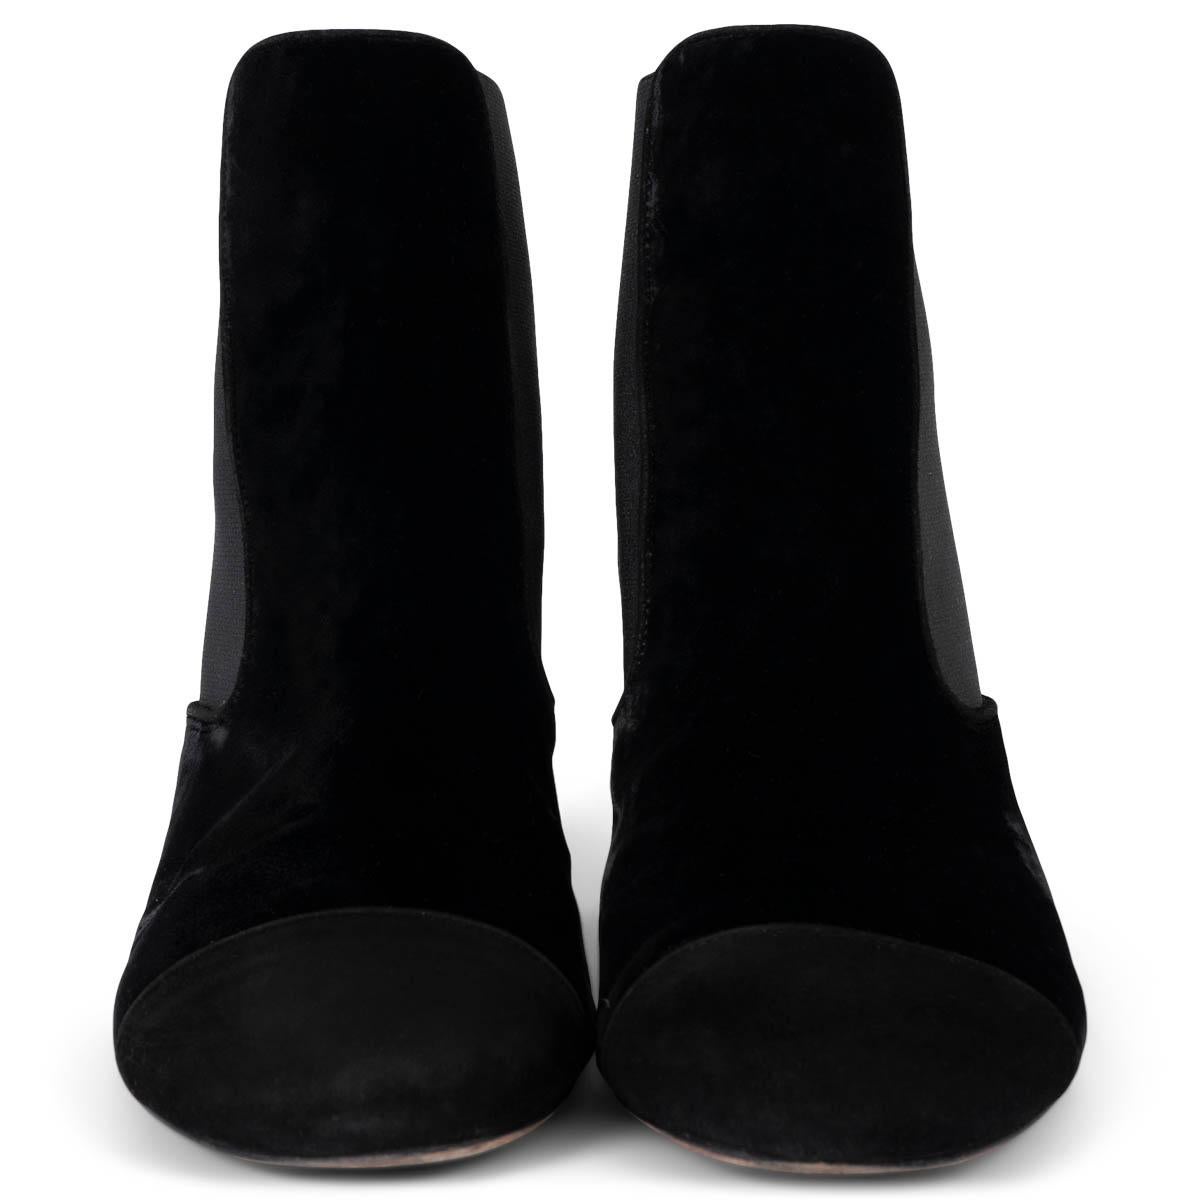 100% authentic Tabitha Simmons Kiki ankle-boots in black velvet with elastic inserts on the side and suede cap toe. Have been worn and are in excellent condition. 

Measurements
Imprinted Size	39.5
Shoe Size	39.5
Inside Sole	26.5cm